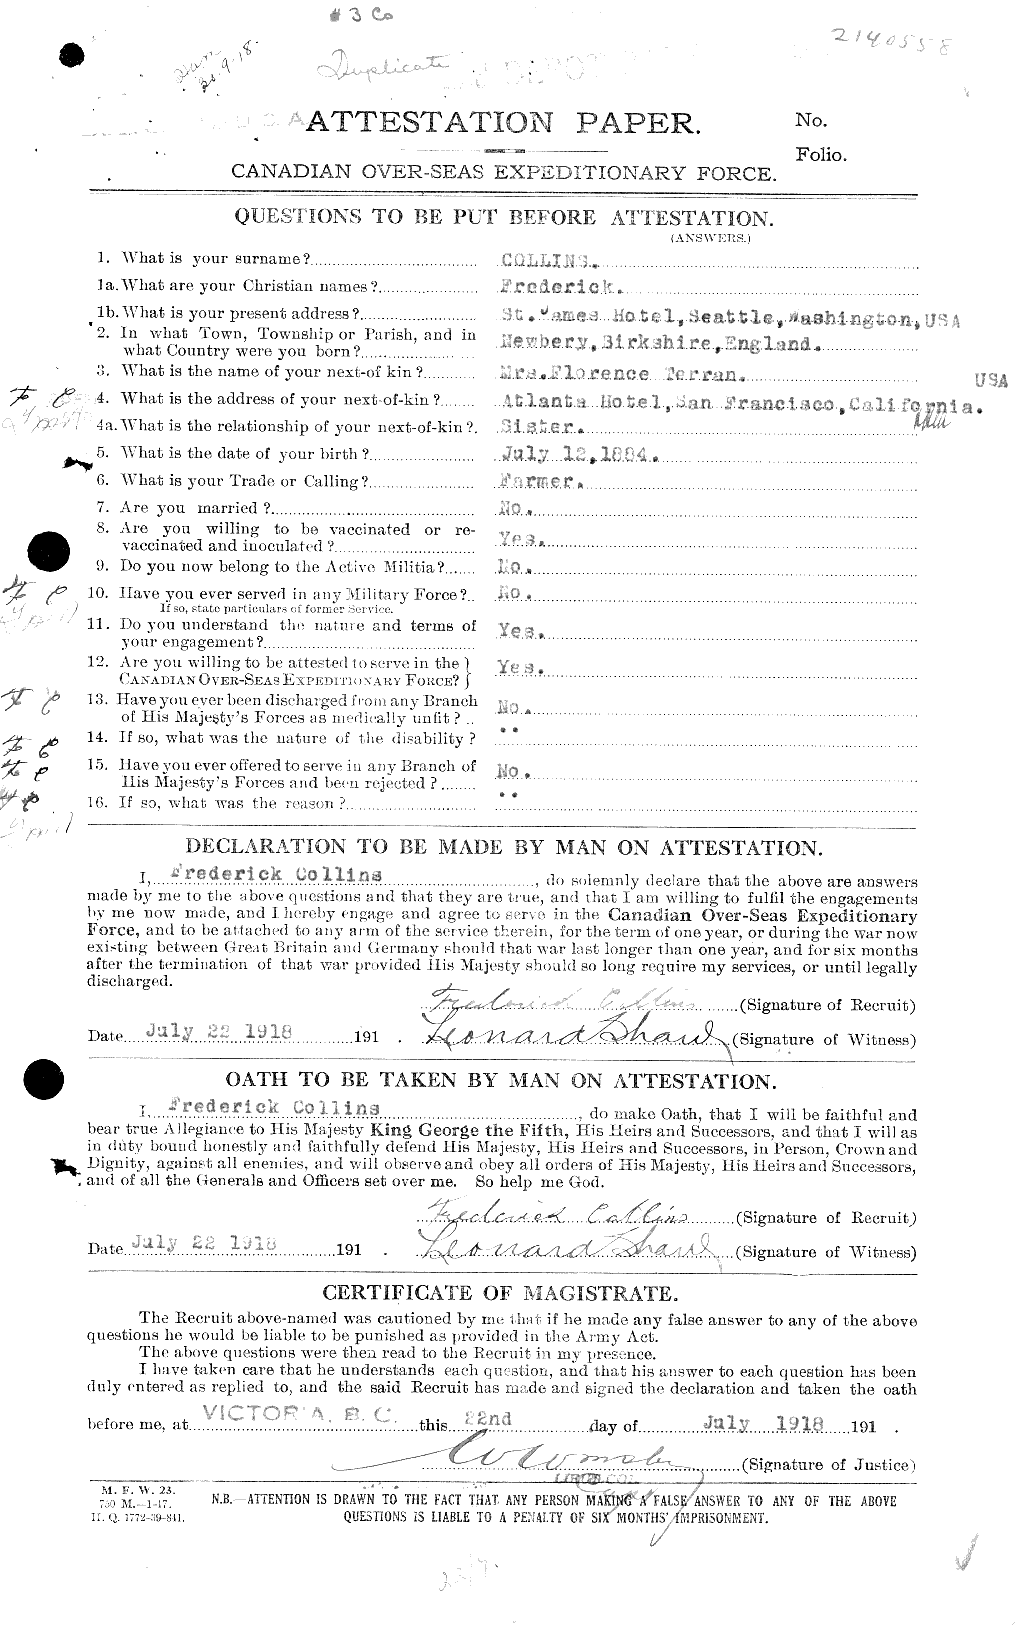 Personnel Records of the First World War - CEF 037828a